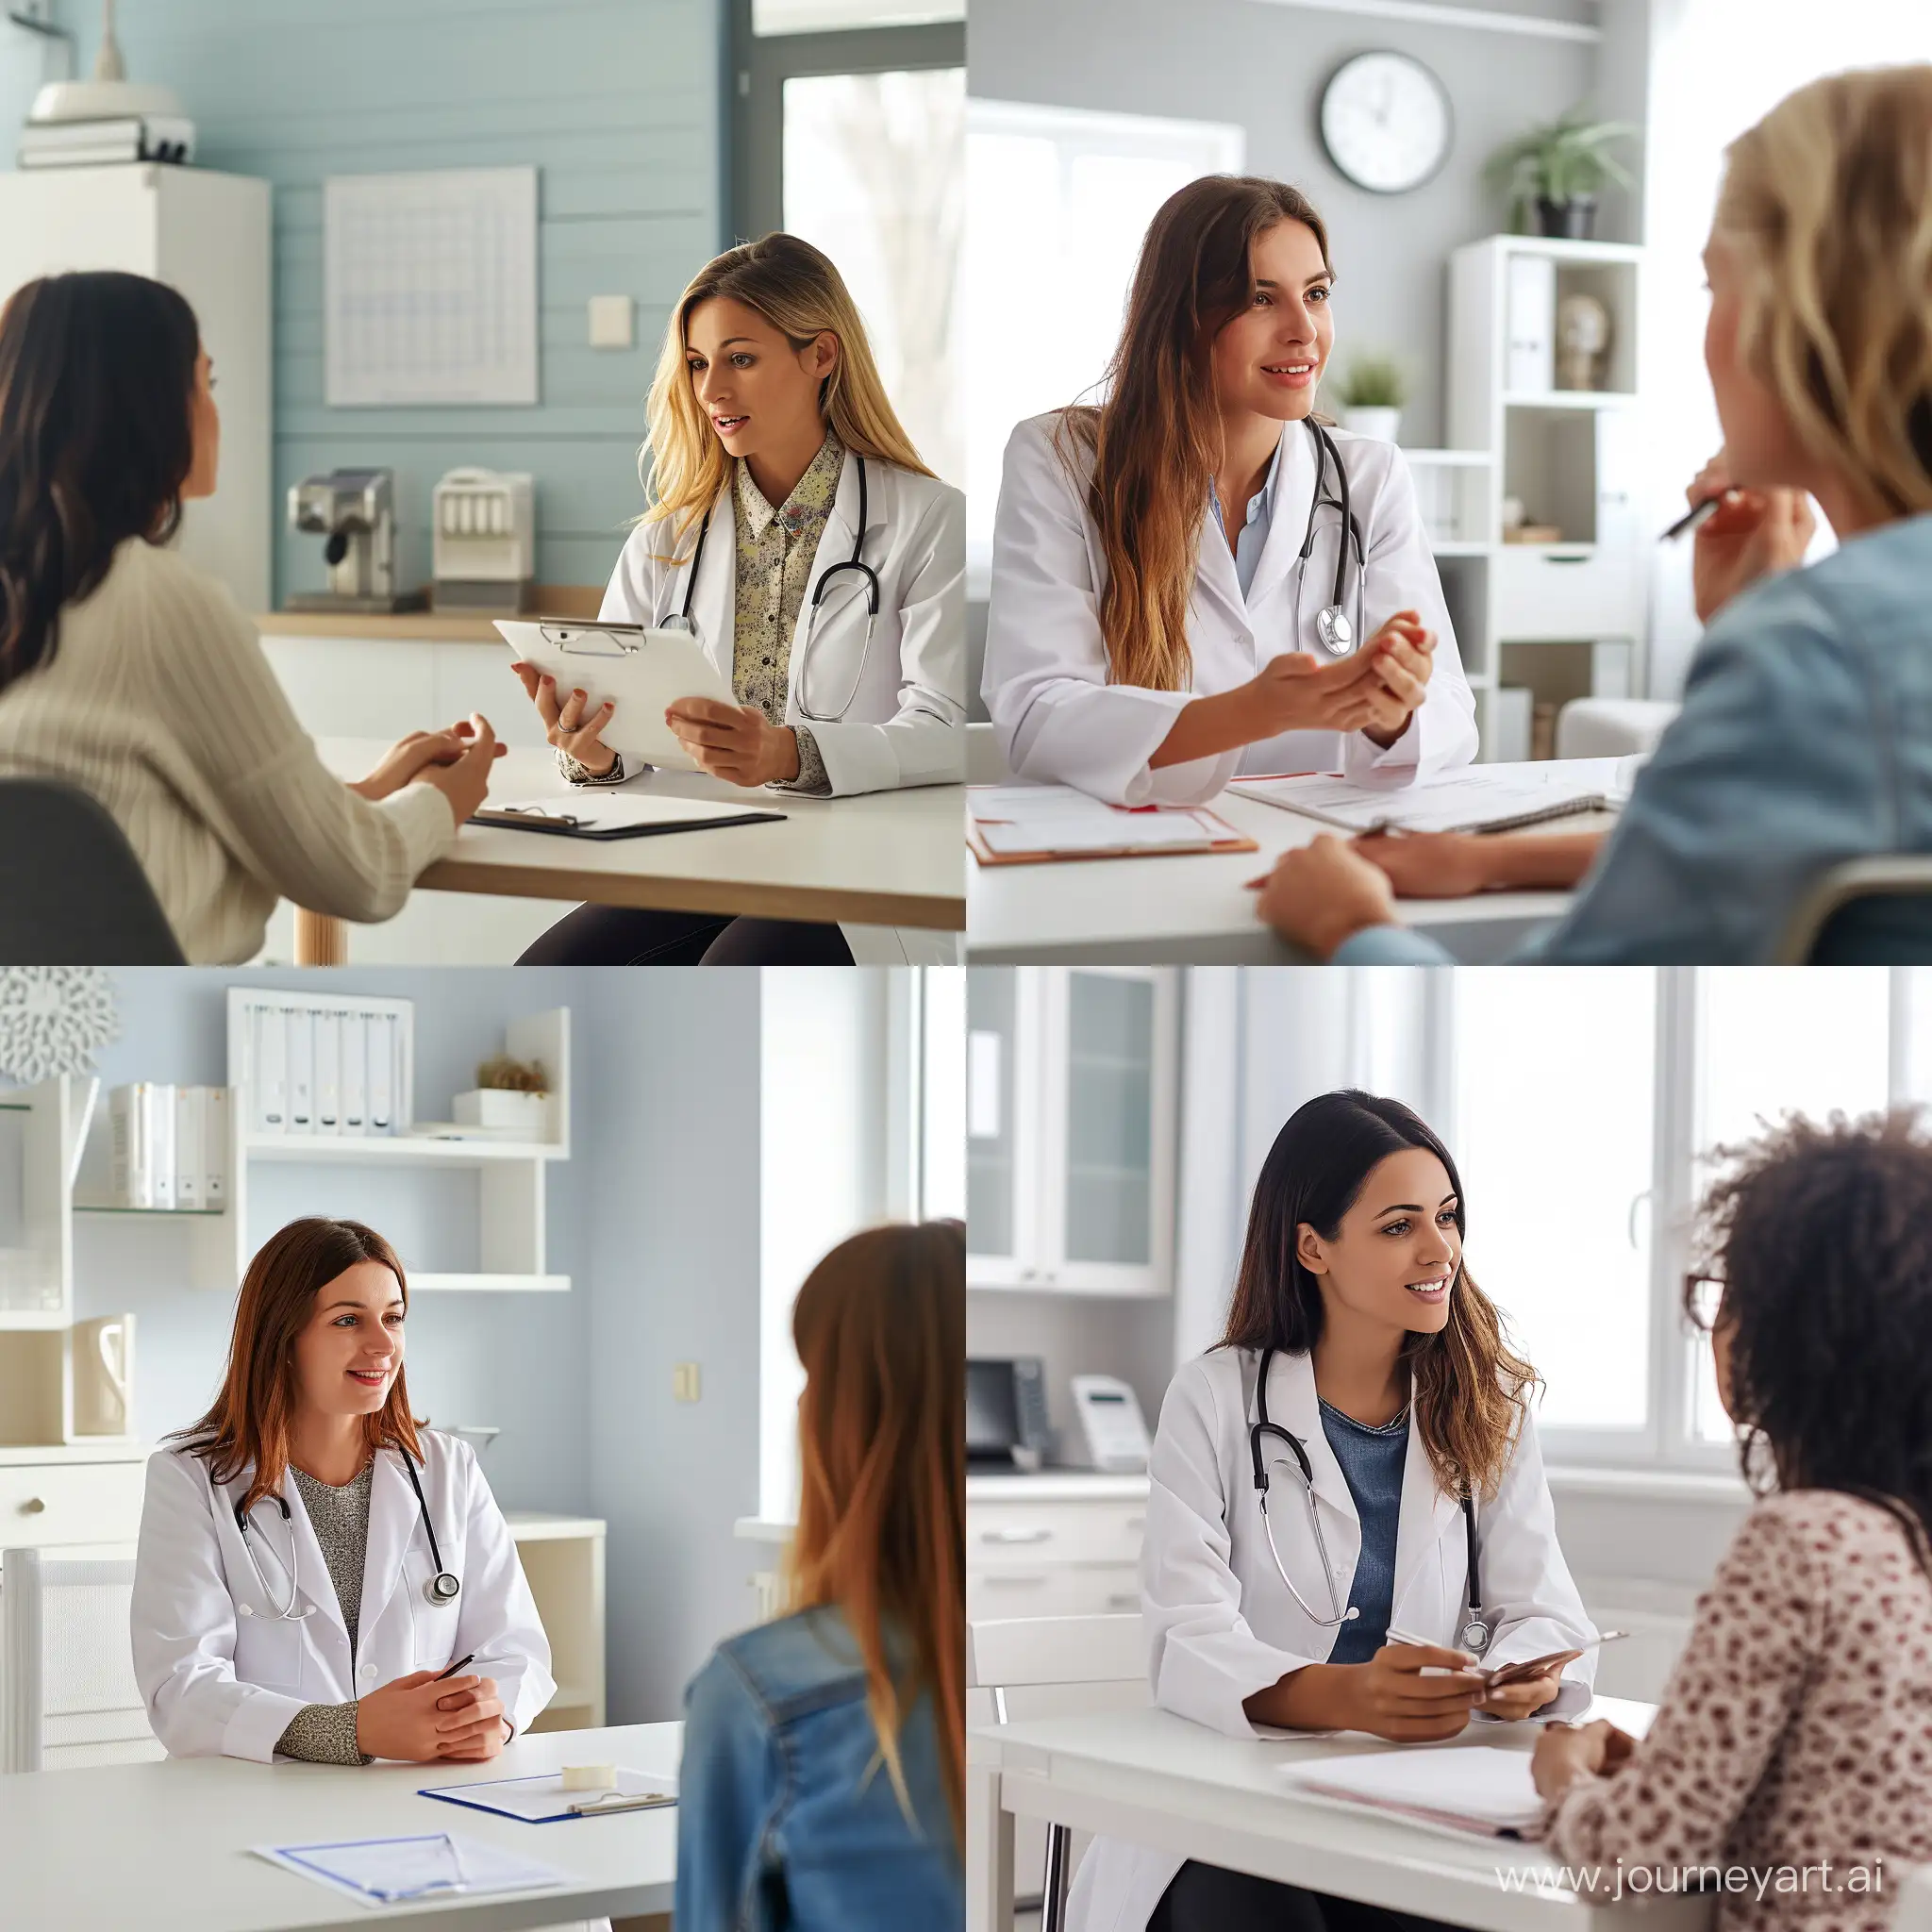 Female-Doctor-Consultation-in-Bright-Medical-Office